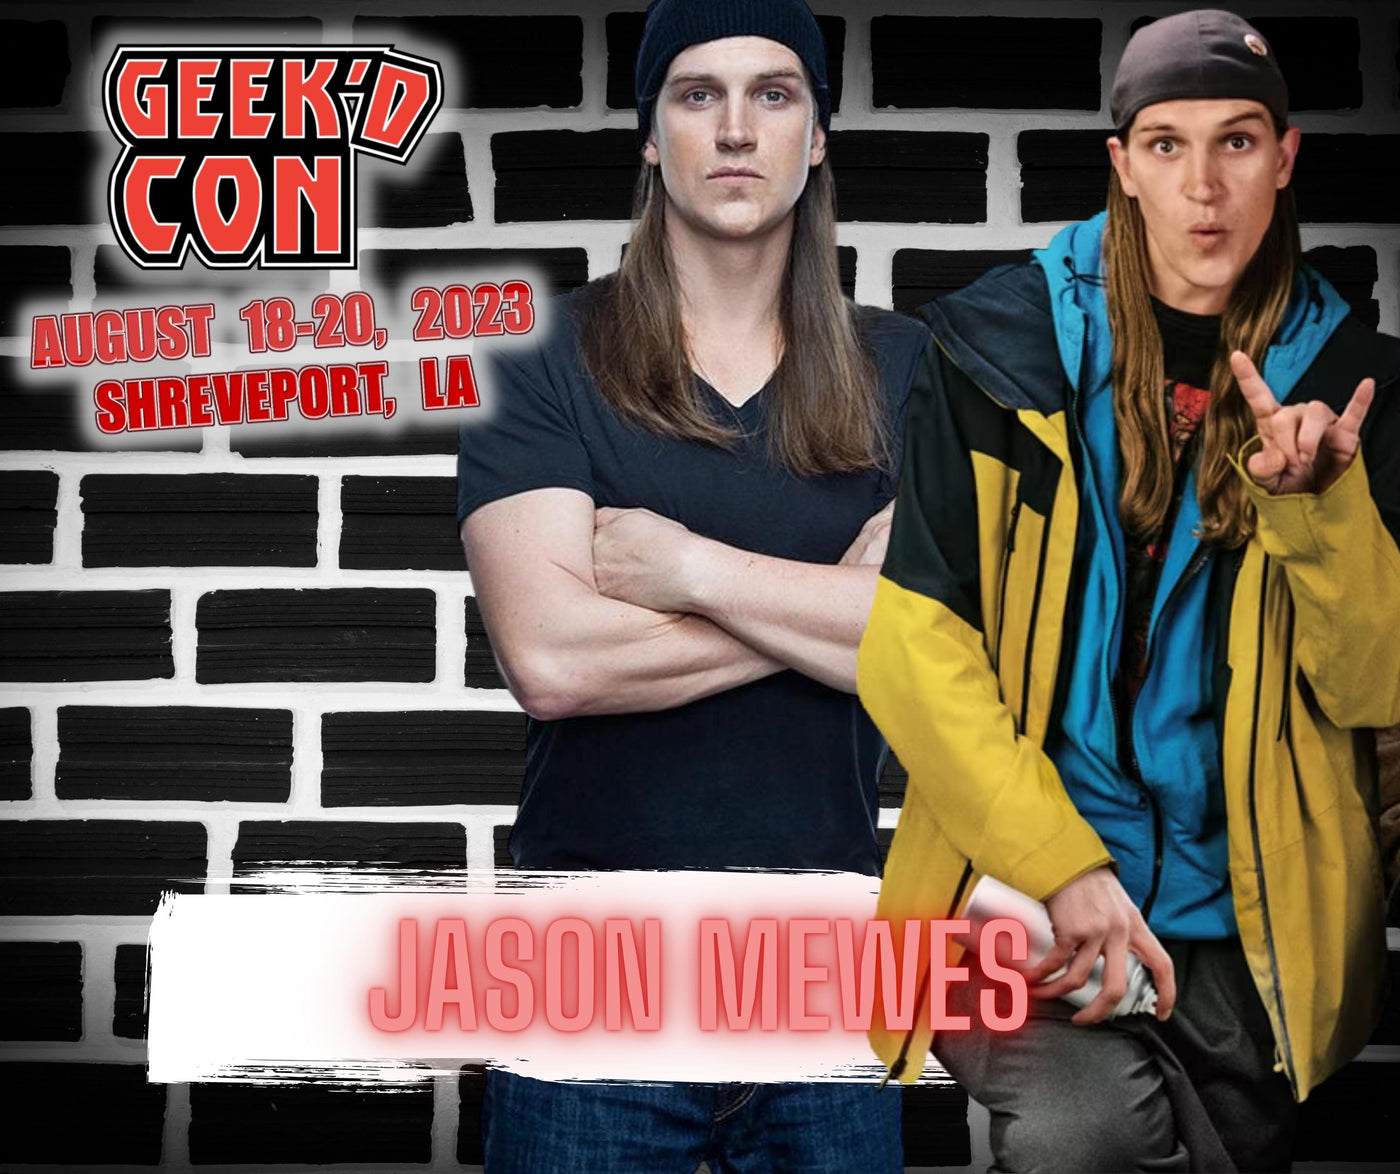 Jason Mewes Official Autograph Mail-In Service - Geek'd Con 2023